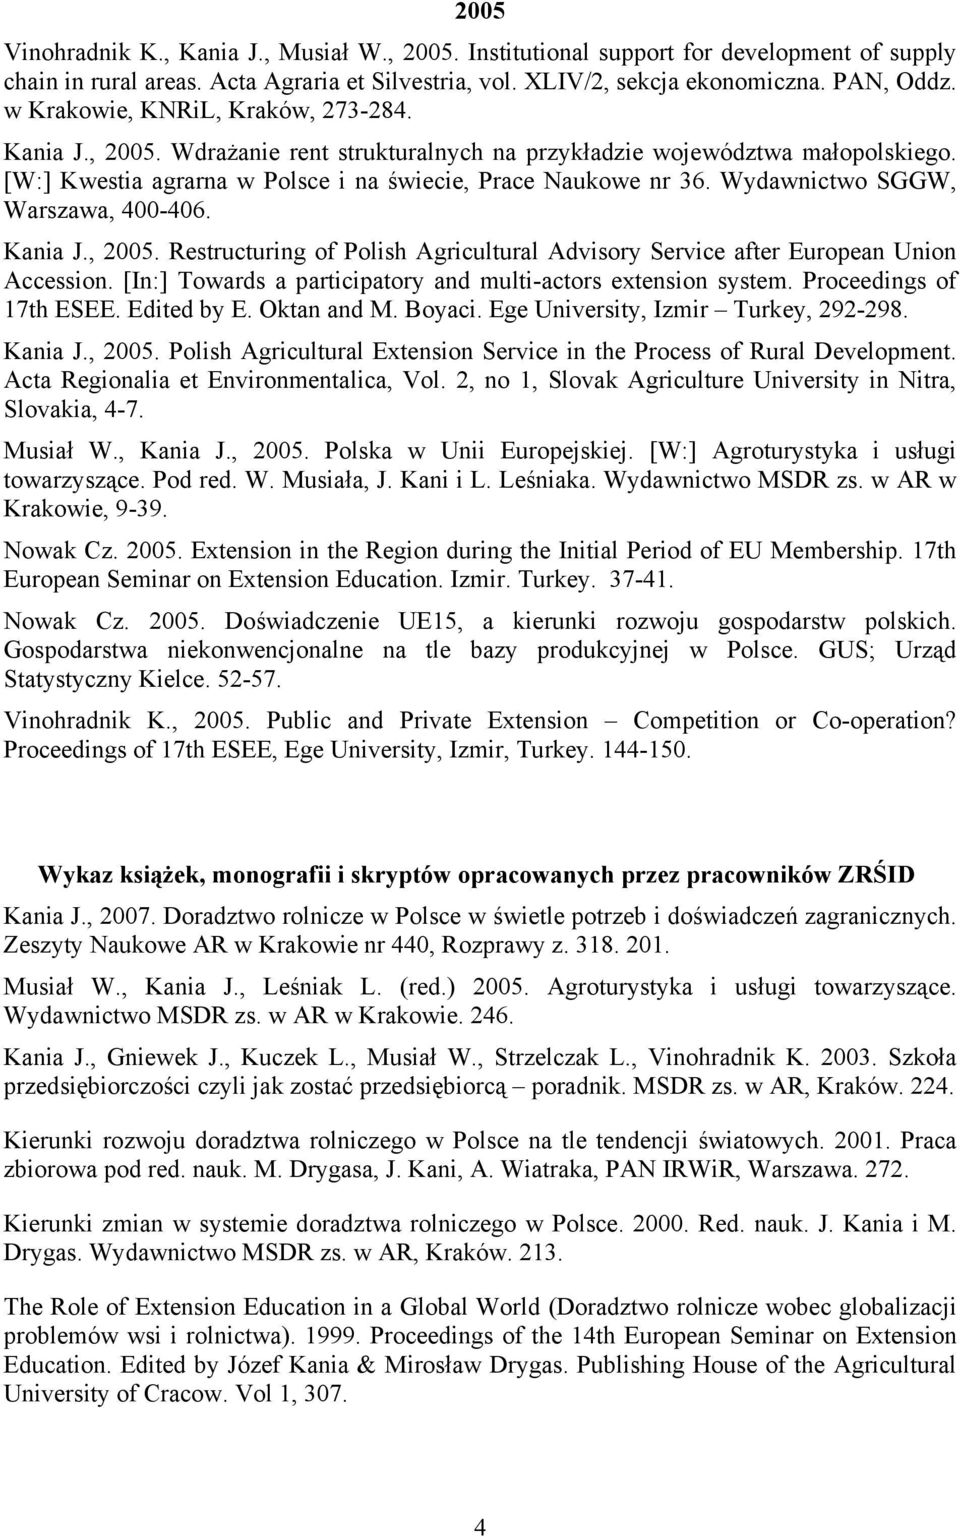 Wydawnictwo SGGW, Warszawa, 400-406. Kania J., 2005. Restructuring of Polish Agricultural Advisory Service after European Union Accession.